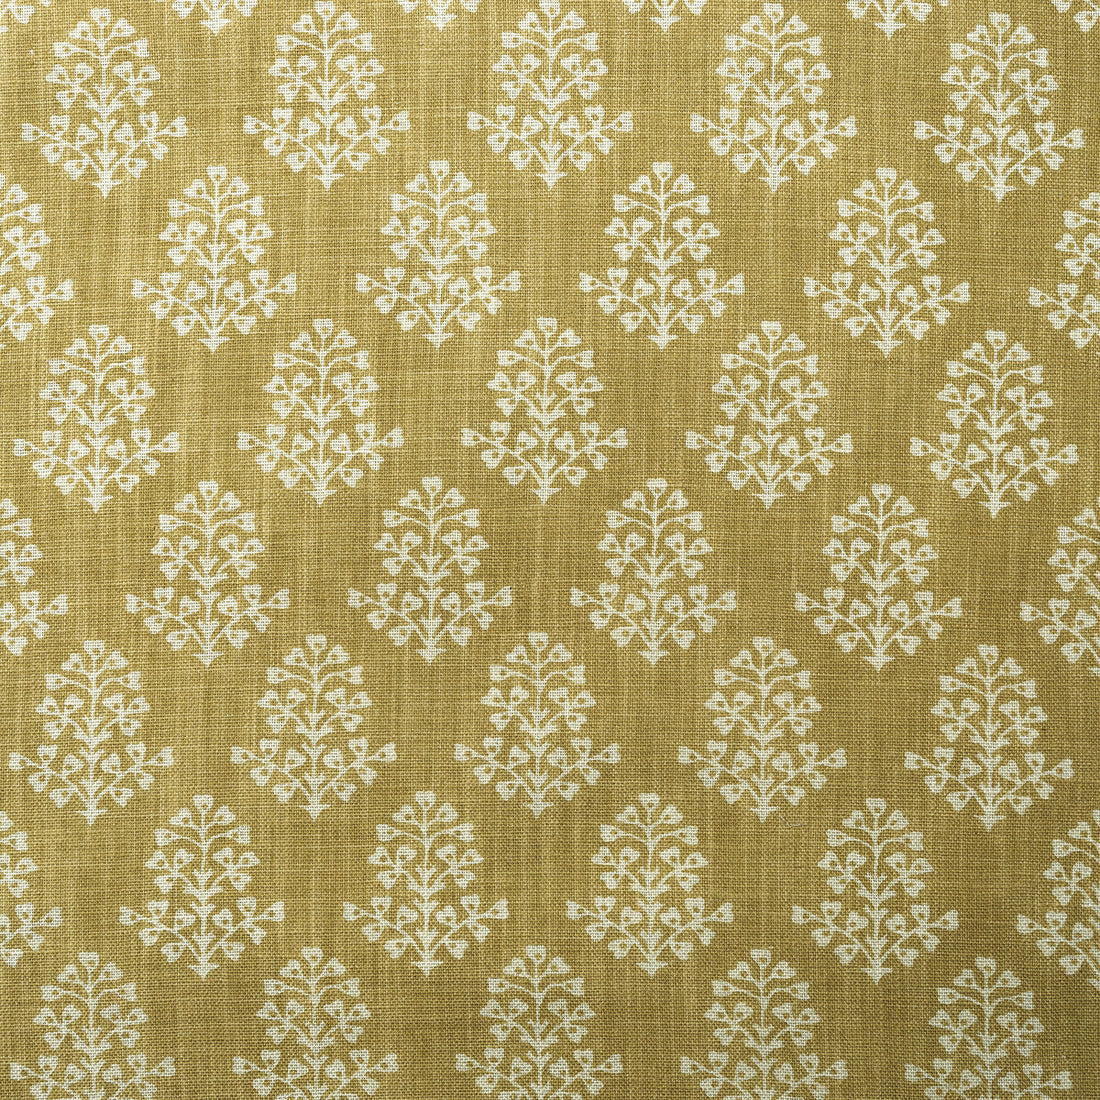 Sprig fabric in honey color - pattern AM100384.416.0 - by Kravet Couture in the Andrew Martin Garden Path collection